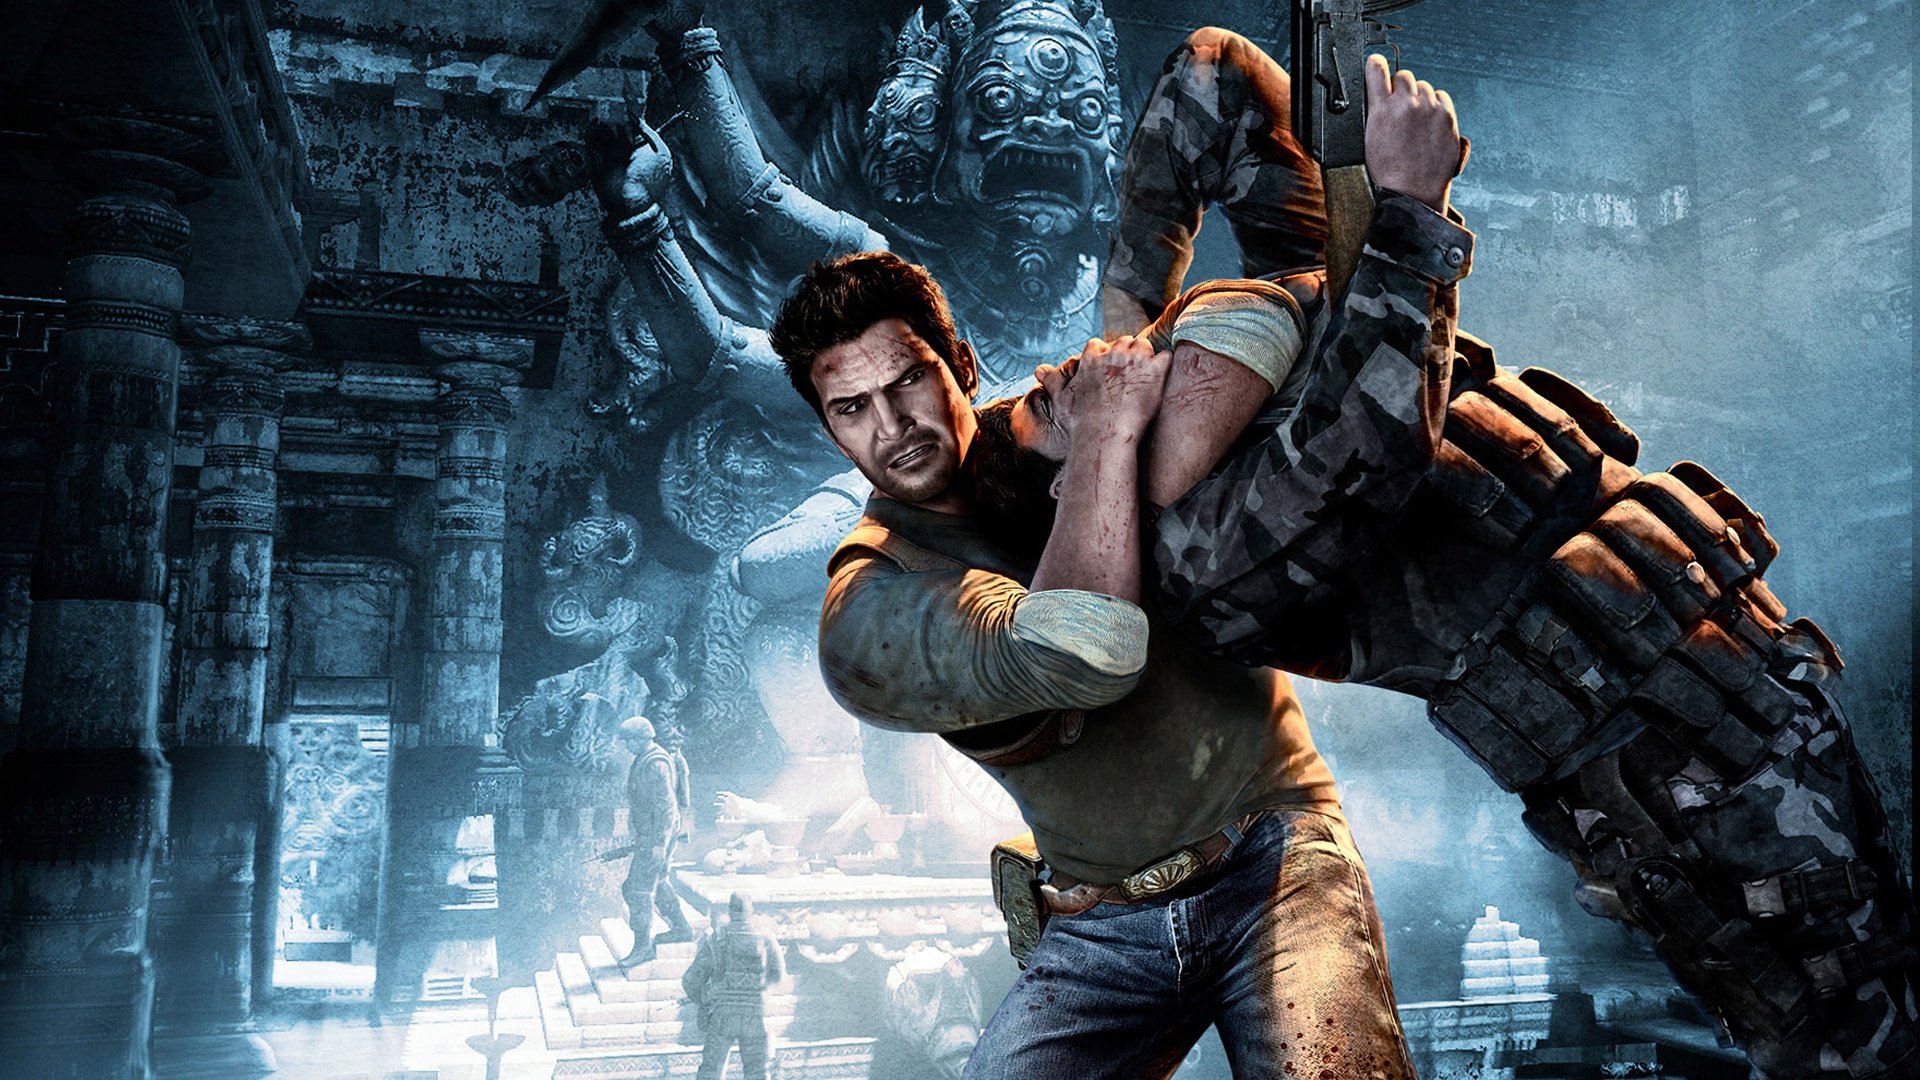 Uncharted 2, 3, and The Last of Us PS3 Multiplayer Servers Go Offline